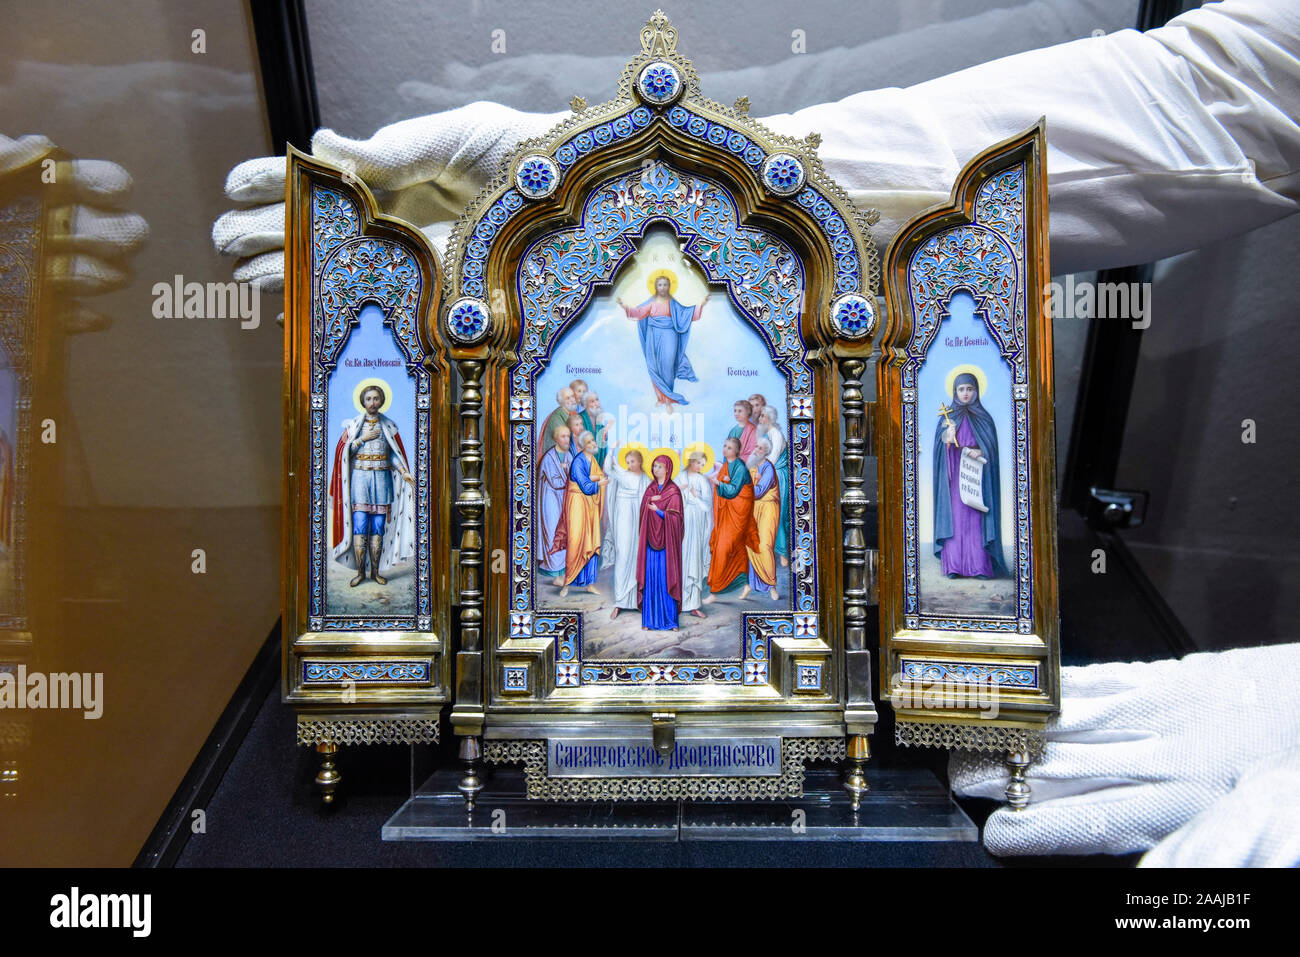 London, UK.  22 November 2019. A technician presents 'A silver-gilt, cloisonné and pictorial enamel triptych icon', 1899-1908, by Khlebnikov, Moscow (Est. GBP100-150k) at the preview for the upcoming sales of Russian artworks at Sotheby's New Bond Street.  The Russian Pictures and Works of Art, Fabergé and Icons sales take place on 26 November.  Credit: Stephen Chung / Alamy Live News Stock Photo